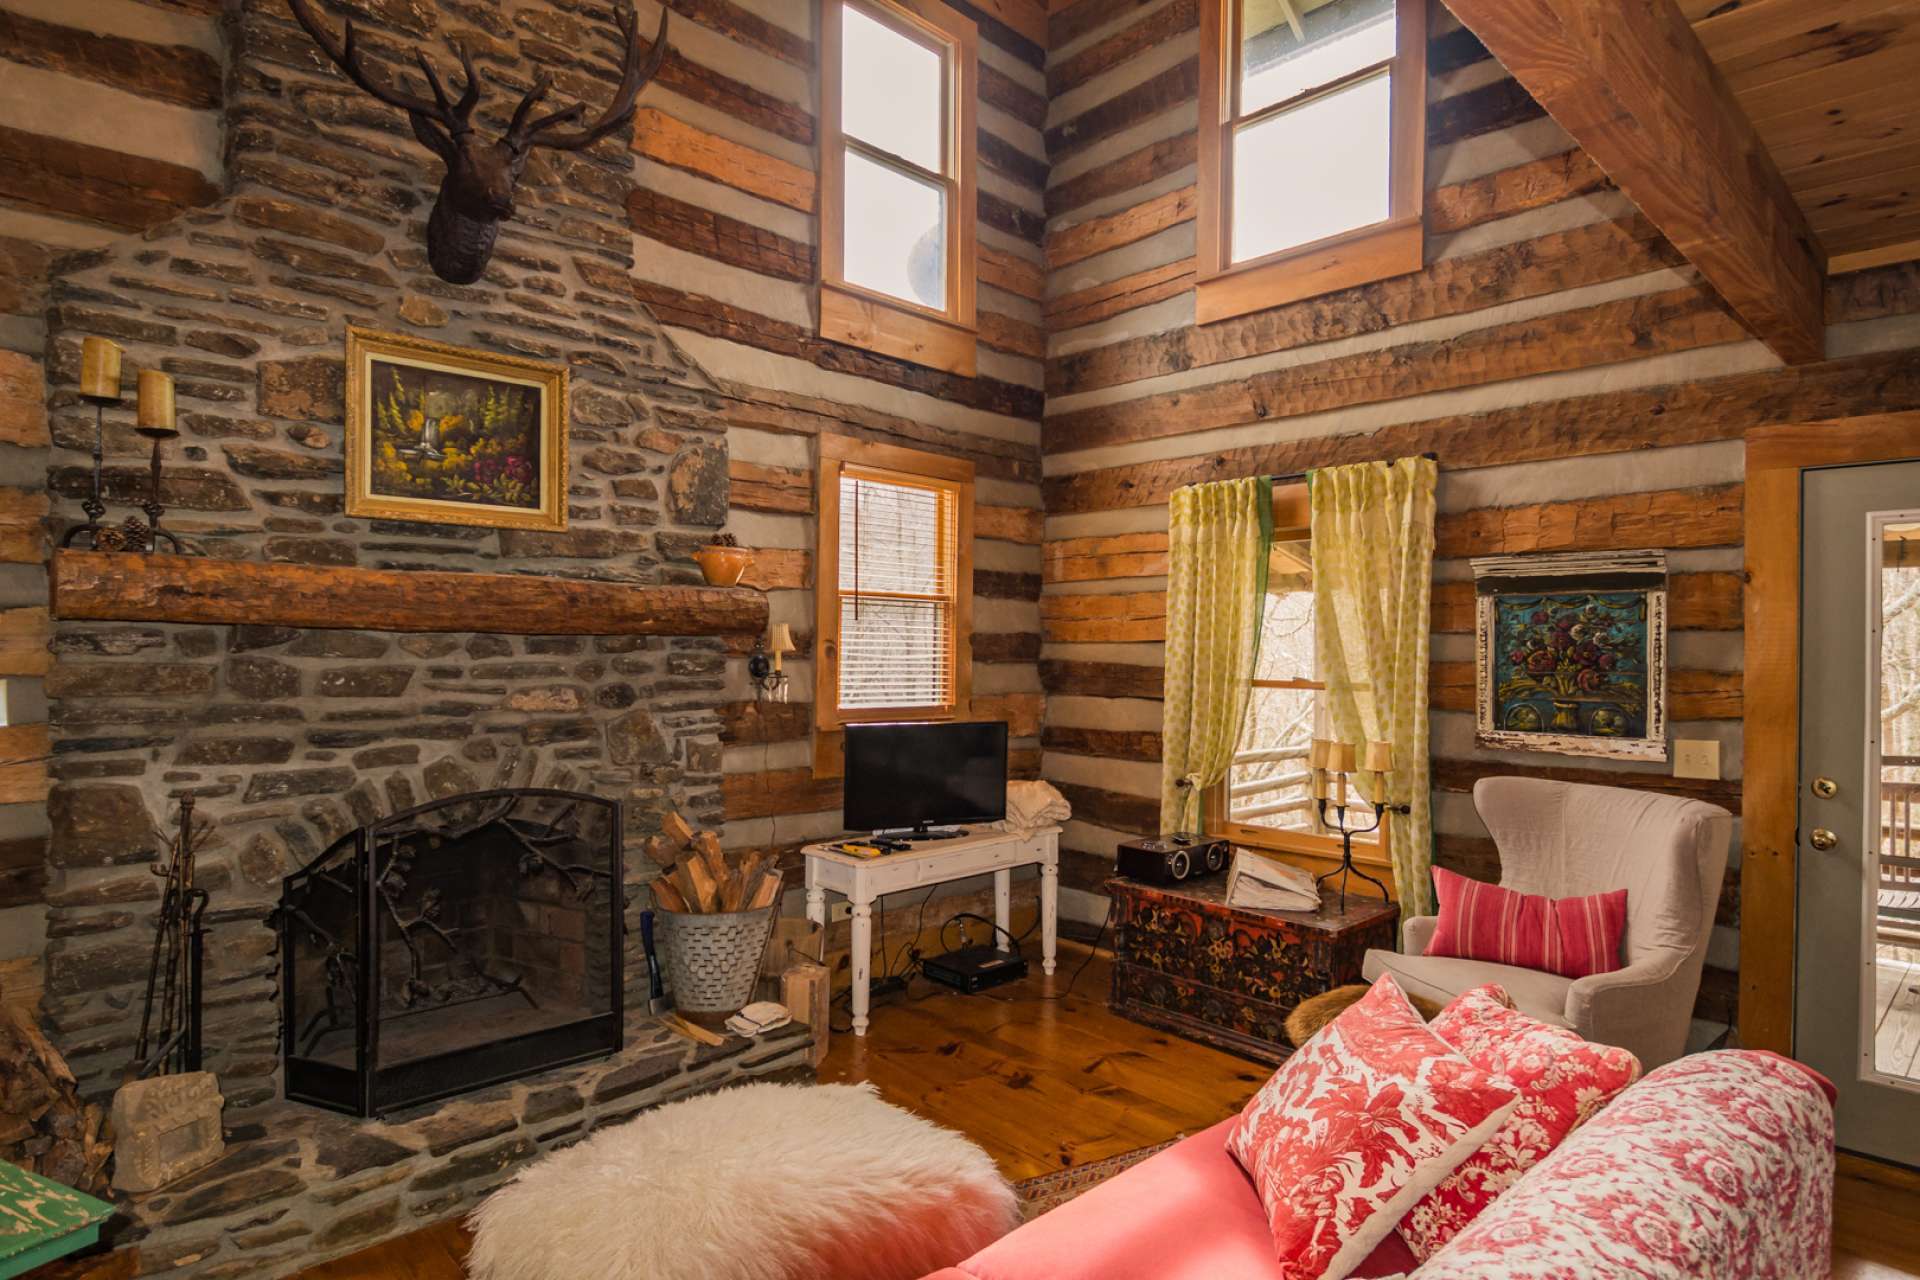 As with all Stonebridge log cabins, the focal point of the great room is the soaring stone wood-burning fireplace, along with wide plank wood floors, vaulted ceiling, and lots of windows for natural light.